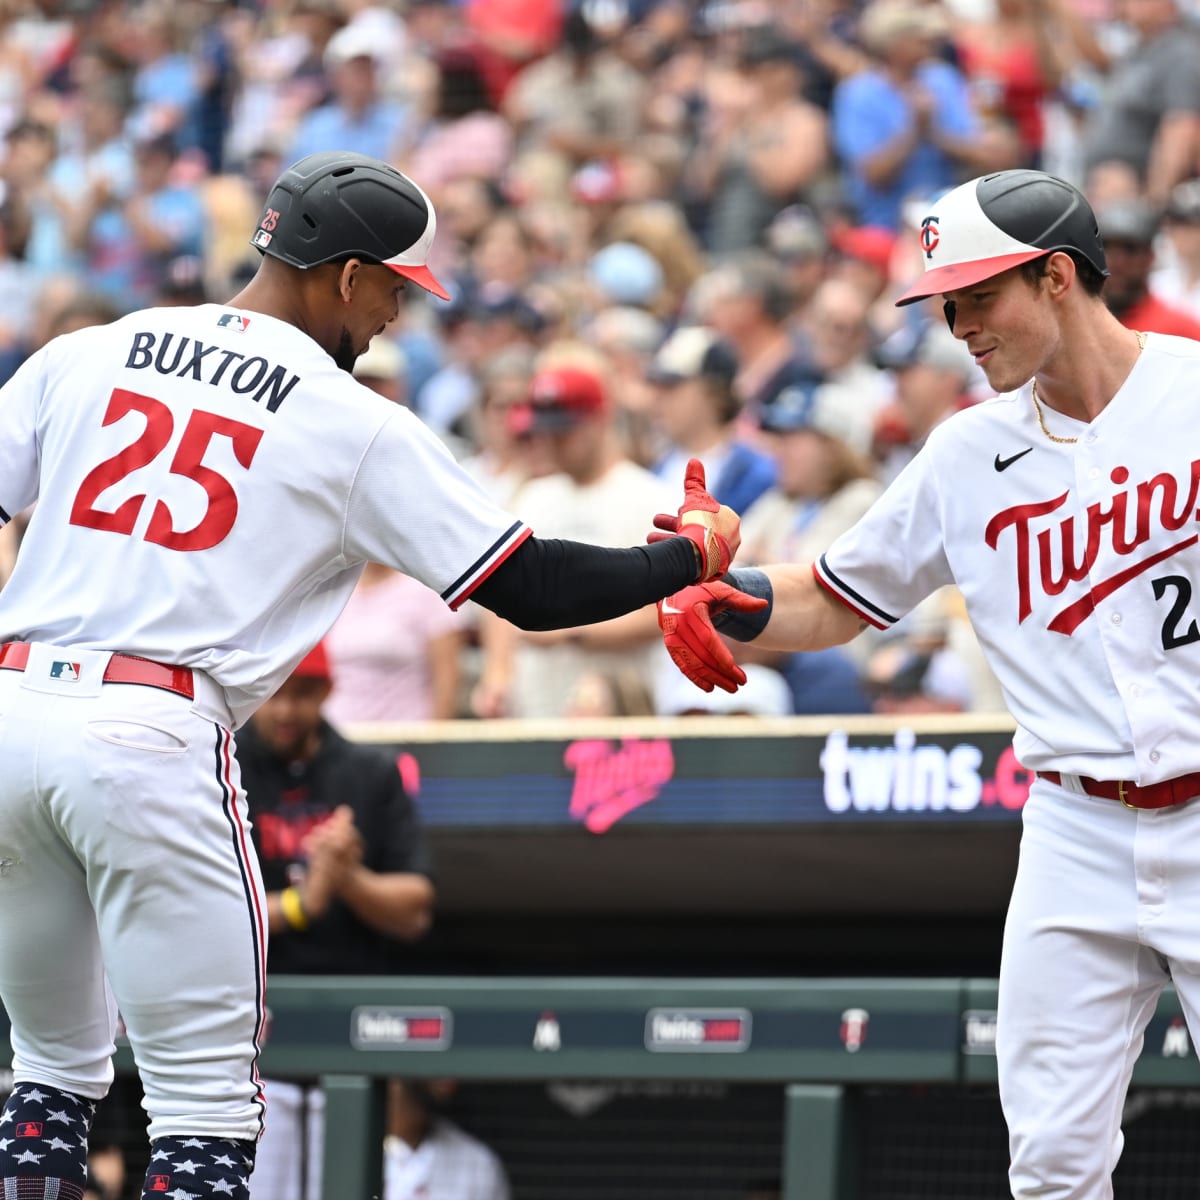 Twins win over Royals 9-3